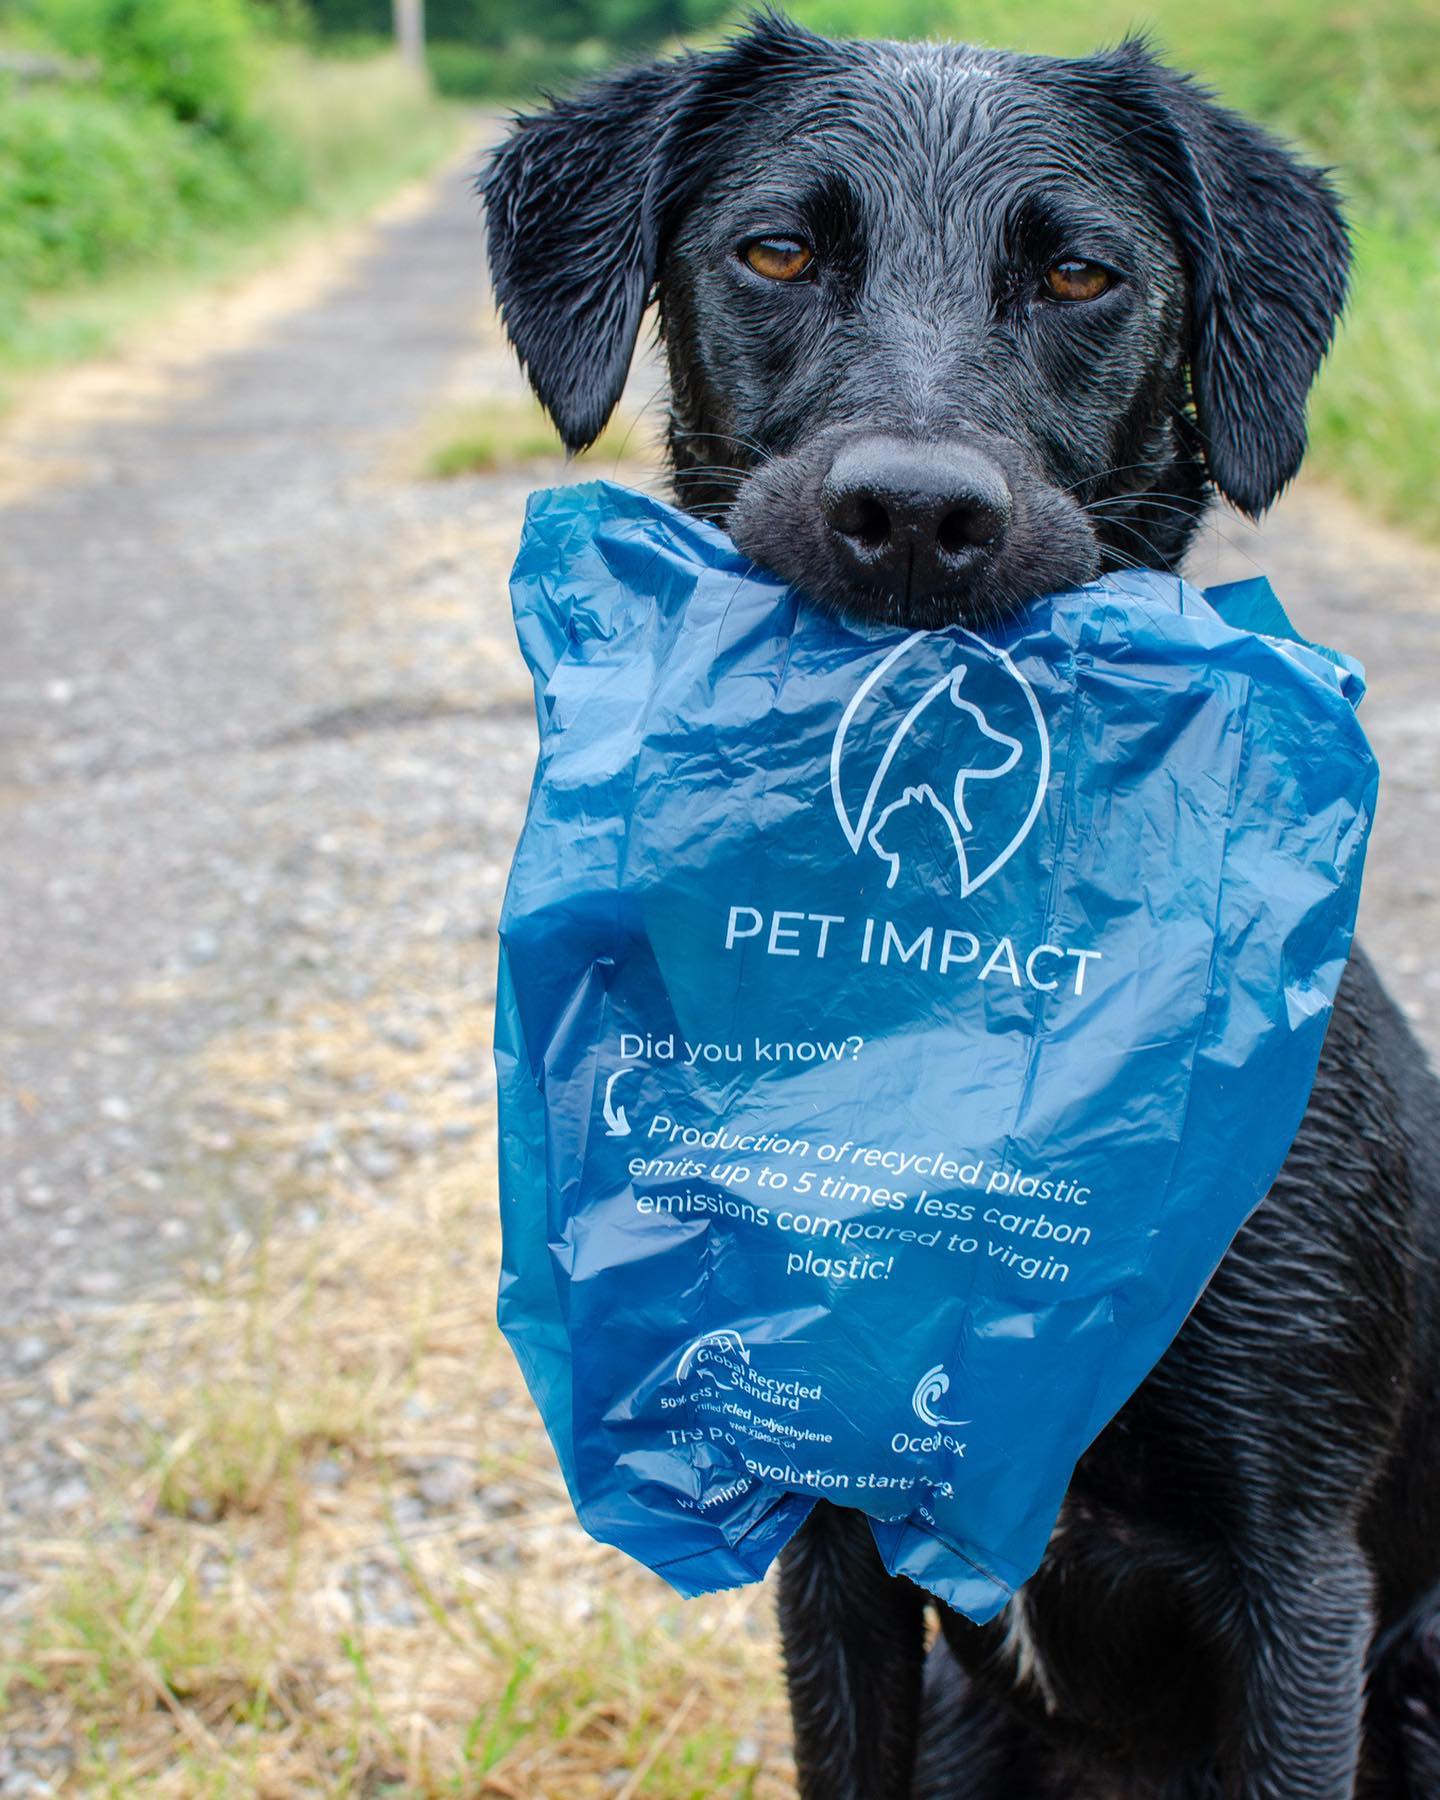 A photo of a black dog holding a ReSEAcled poo bag in their mouth